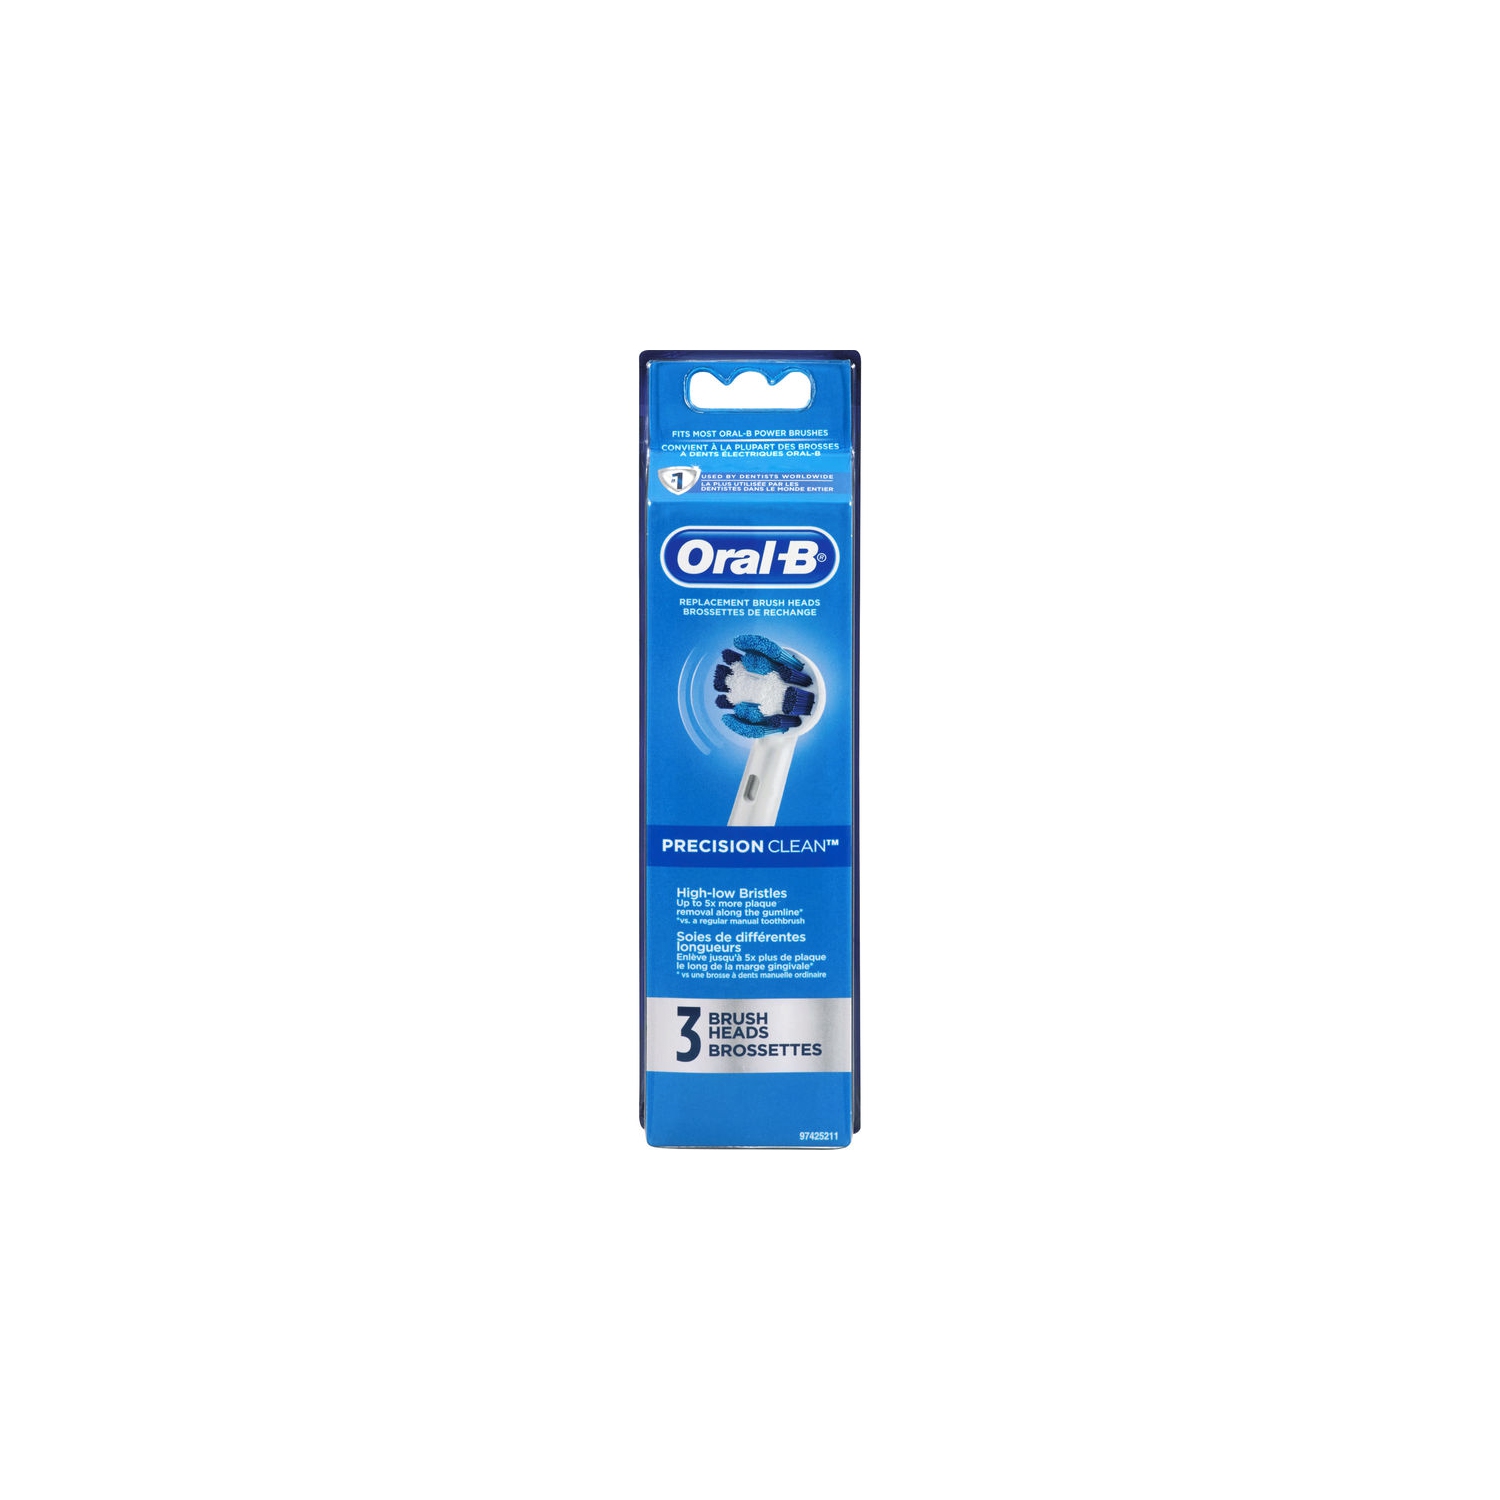 Oral-B Precision Clean - Electric Toothbrush Replacement Brush Heads Refill - 3 Count